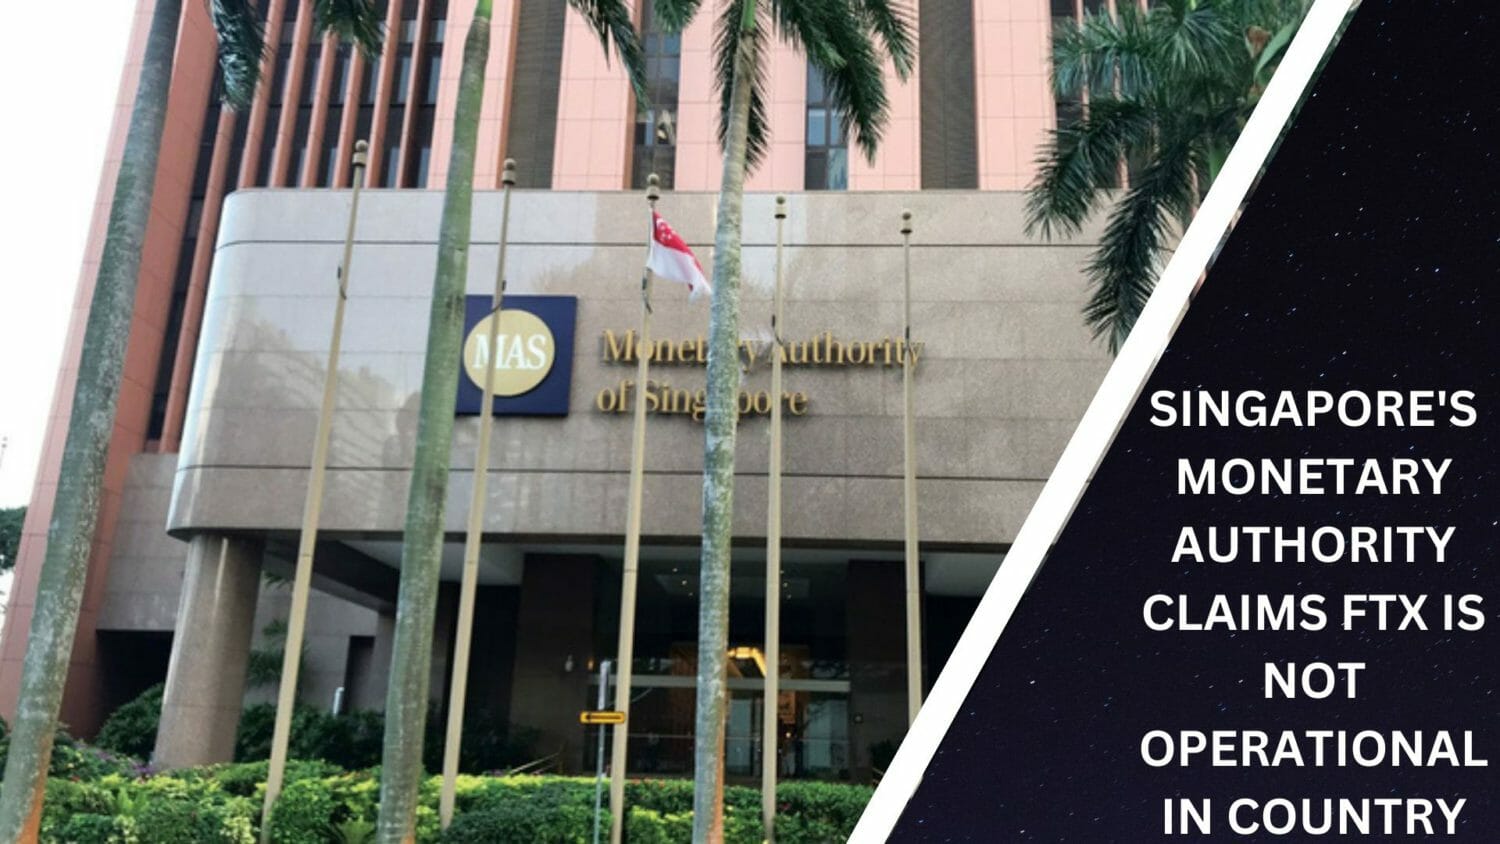 Singapore'S Monetary Authority Claims Ftx Is Not Operational In Country